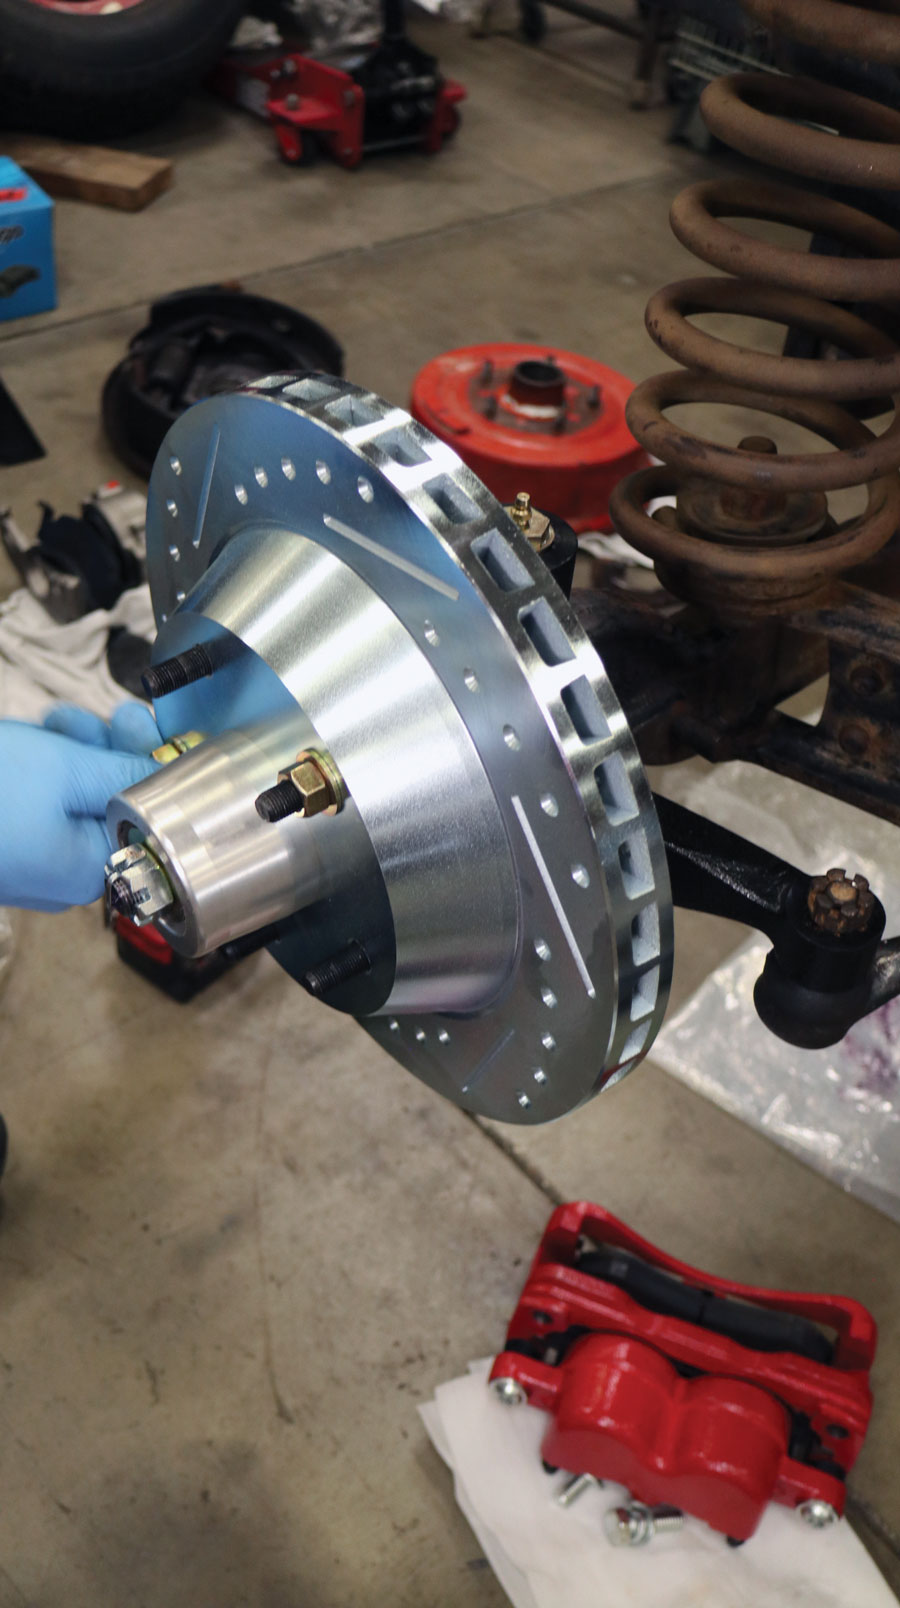 Set the new rotor onto the hub and temporarily secure with a couple lug nut